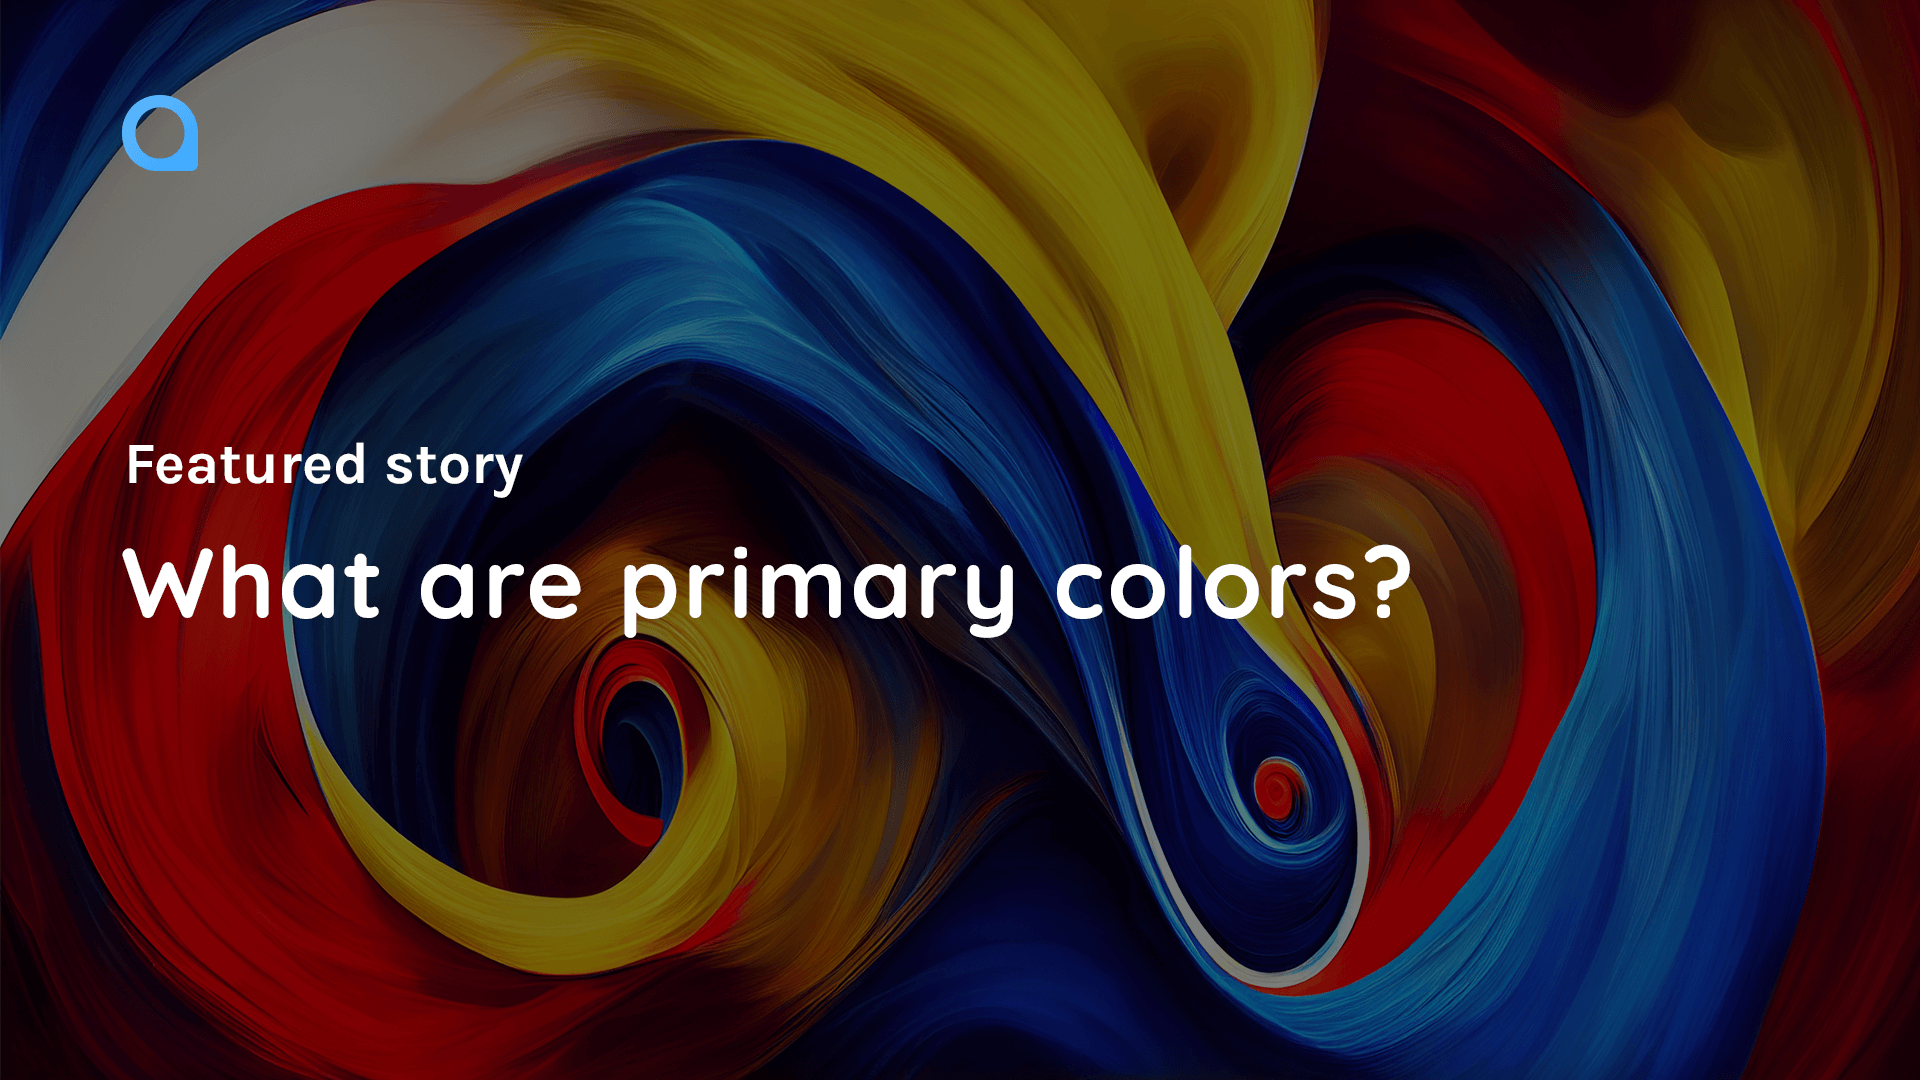 Why are red, yellow, and blue the primary colors in painting but computer  screens use red, green, and blue?